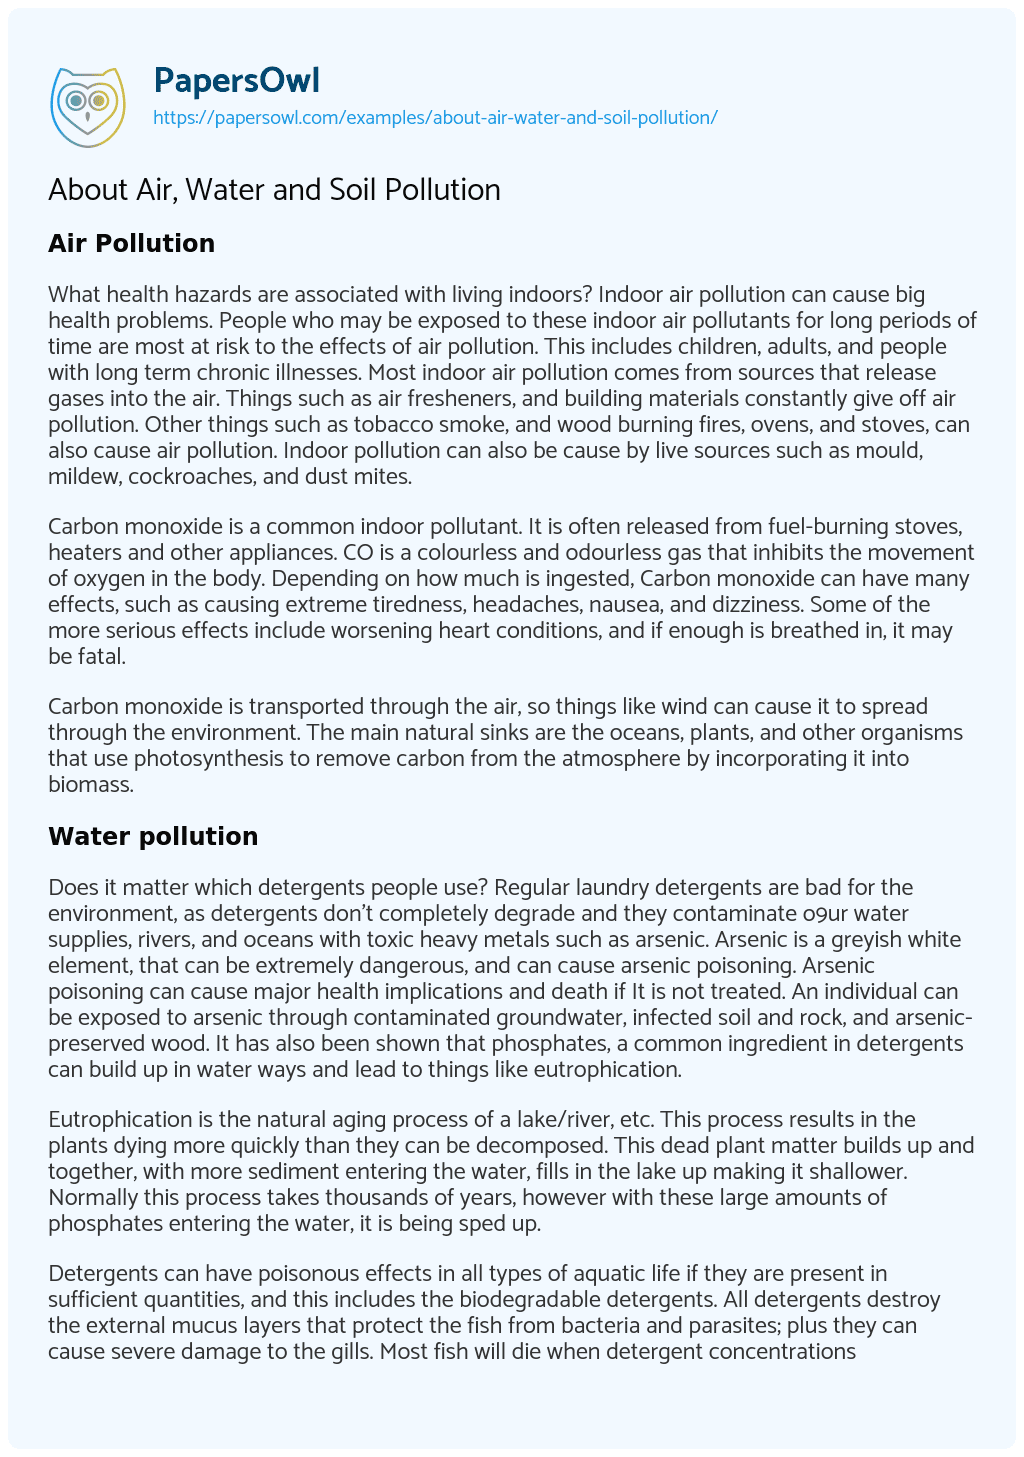 About Air, Water and Soil Pollution essay